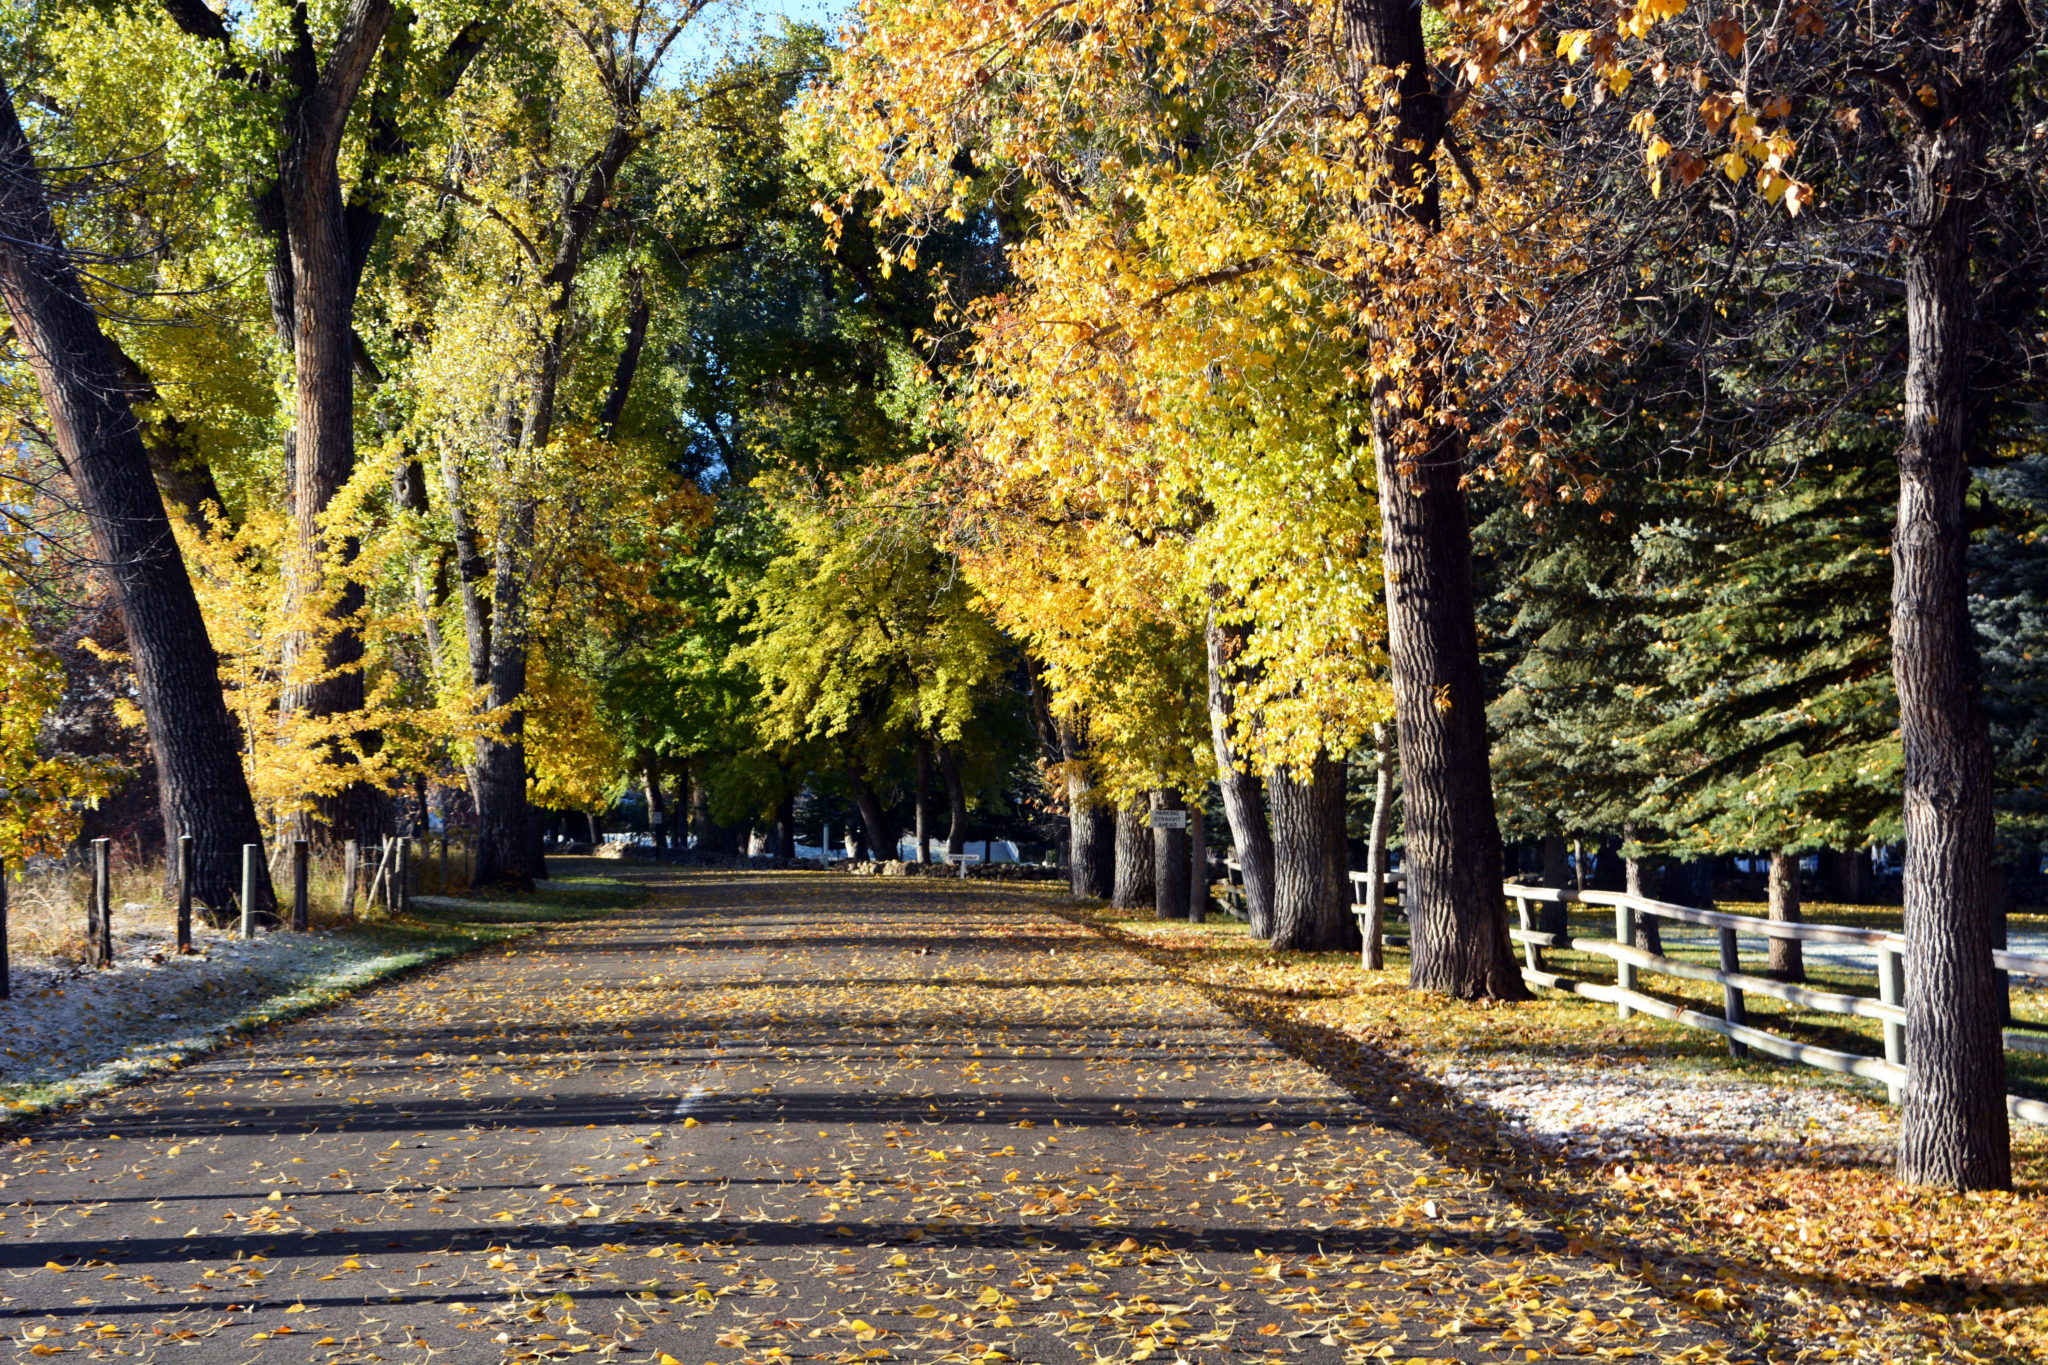 Brinton Drive with trees in autumn